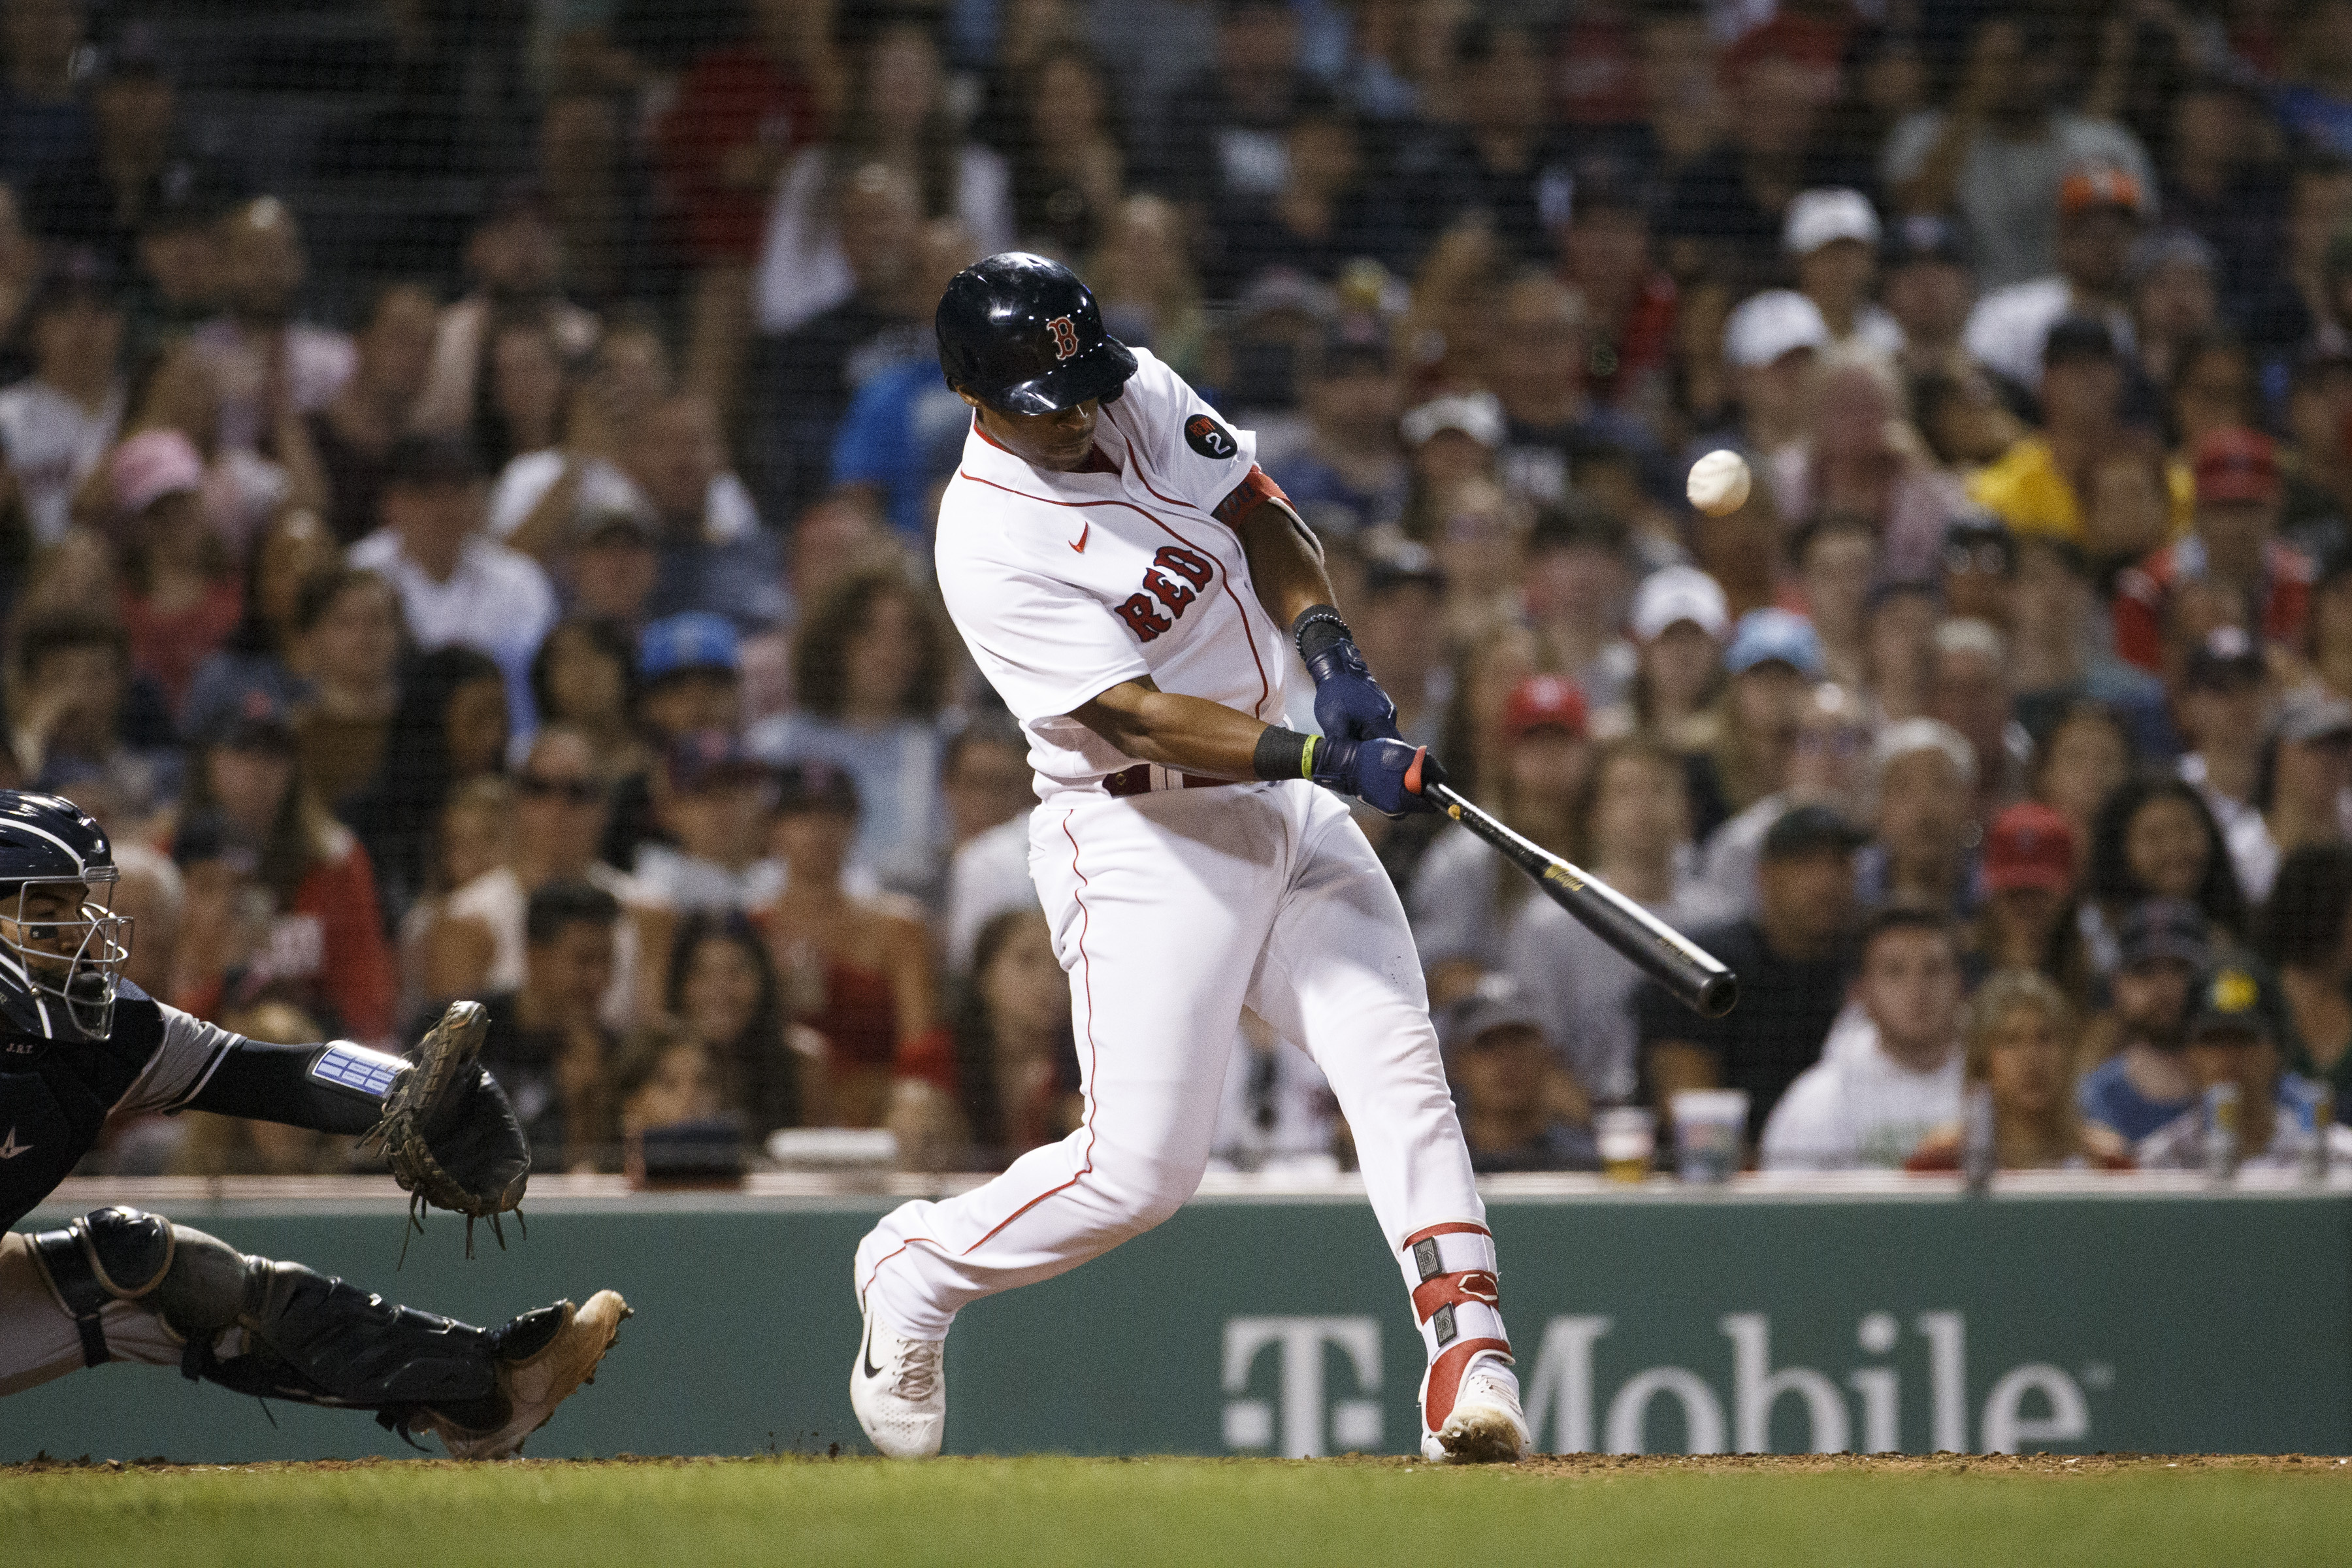 After one game, Red Sox option Jeter Downs back to Worcester